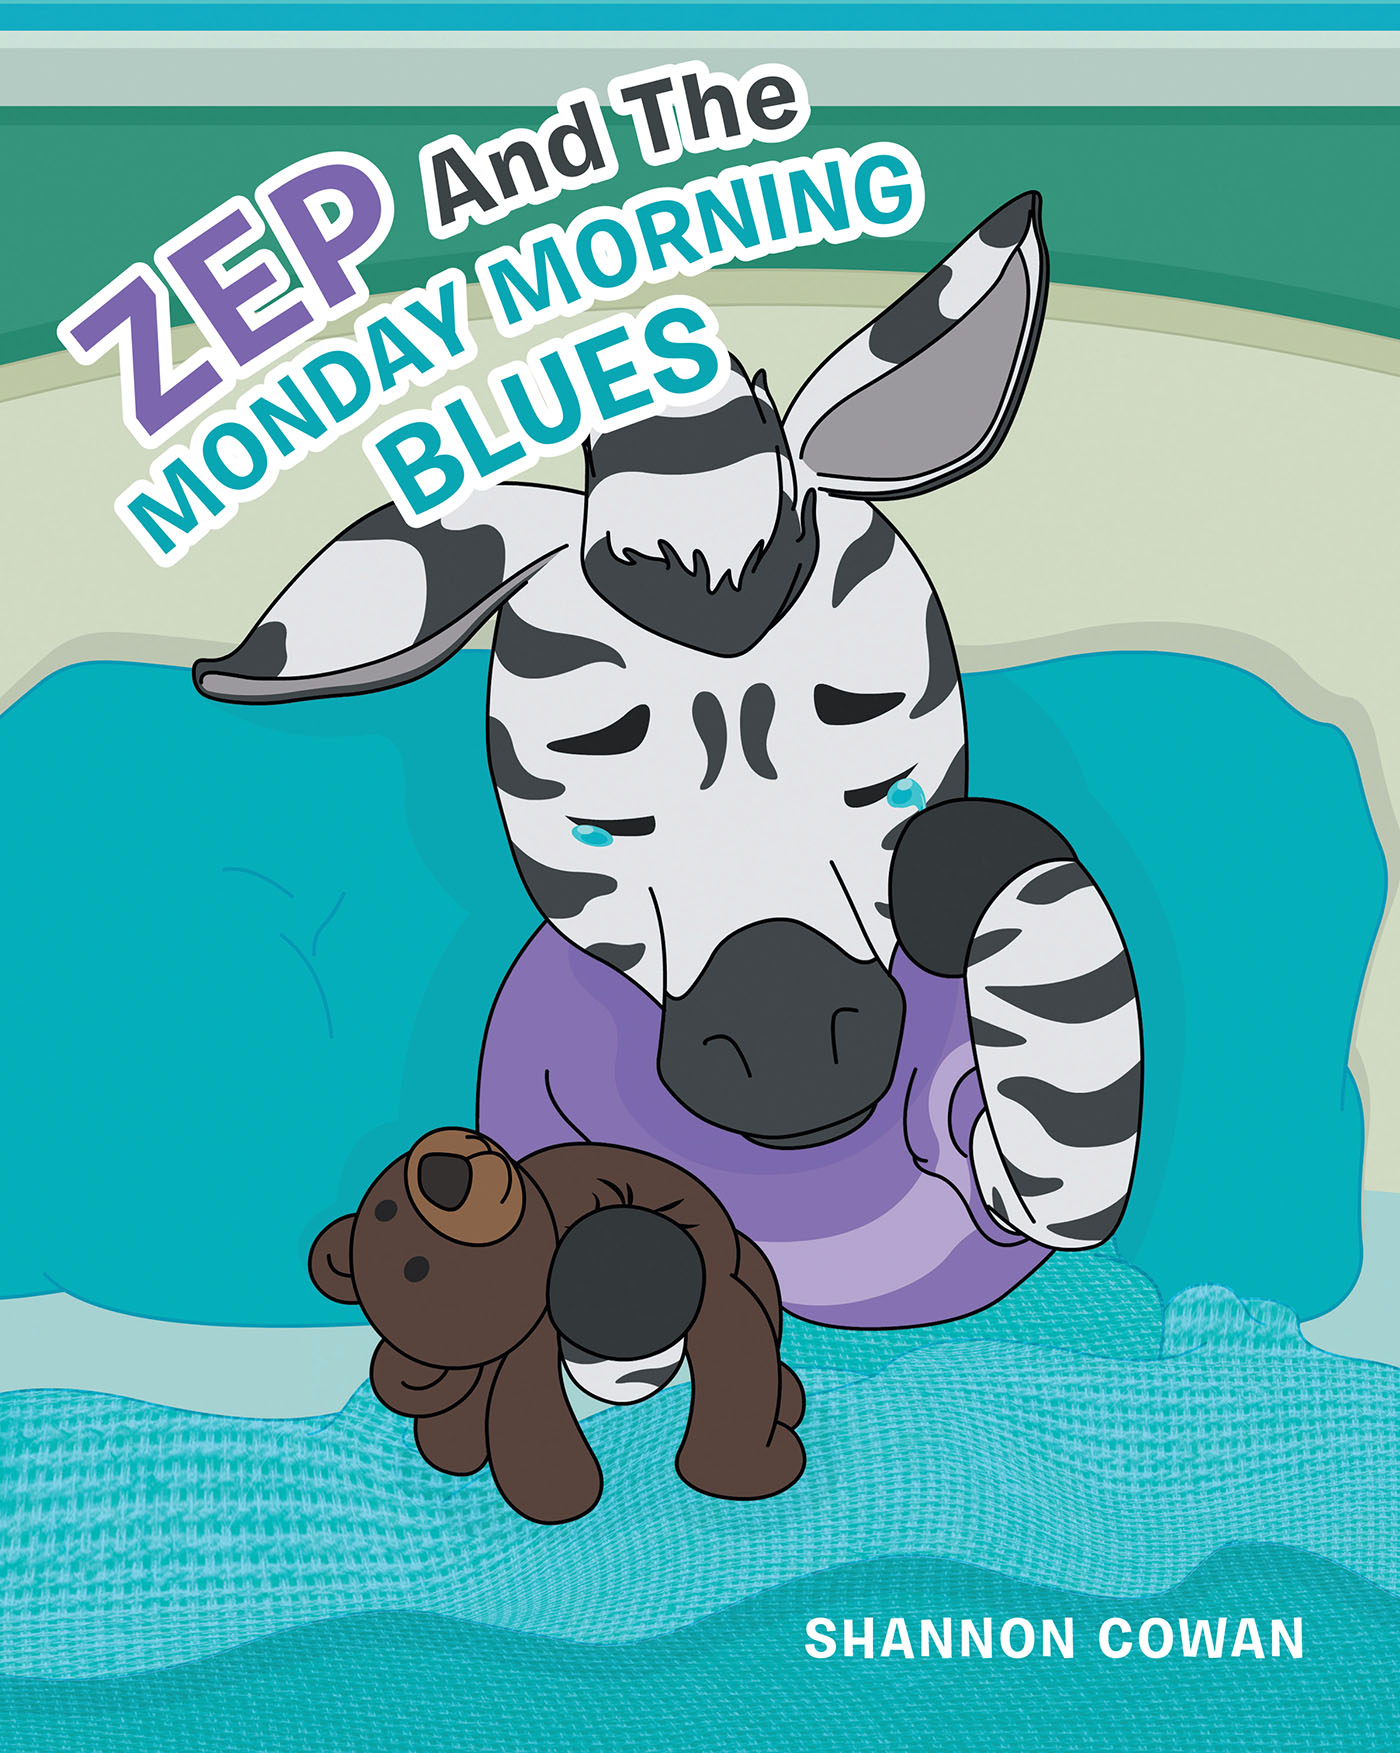 Author Shannon Cowan’s New Book, "Zep and The Monday Morning Blues," is an Engaging Children’s Story That Introduces Zep, Who Does Not Like Monday Mornings